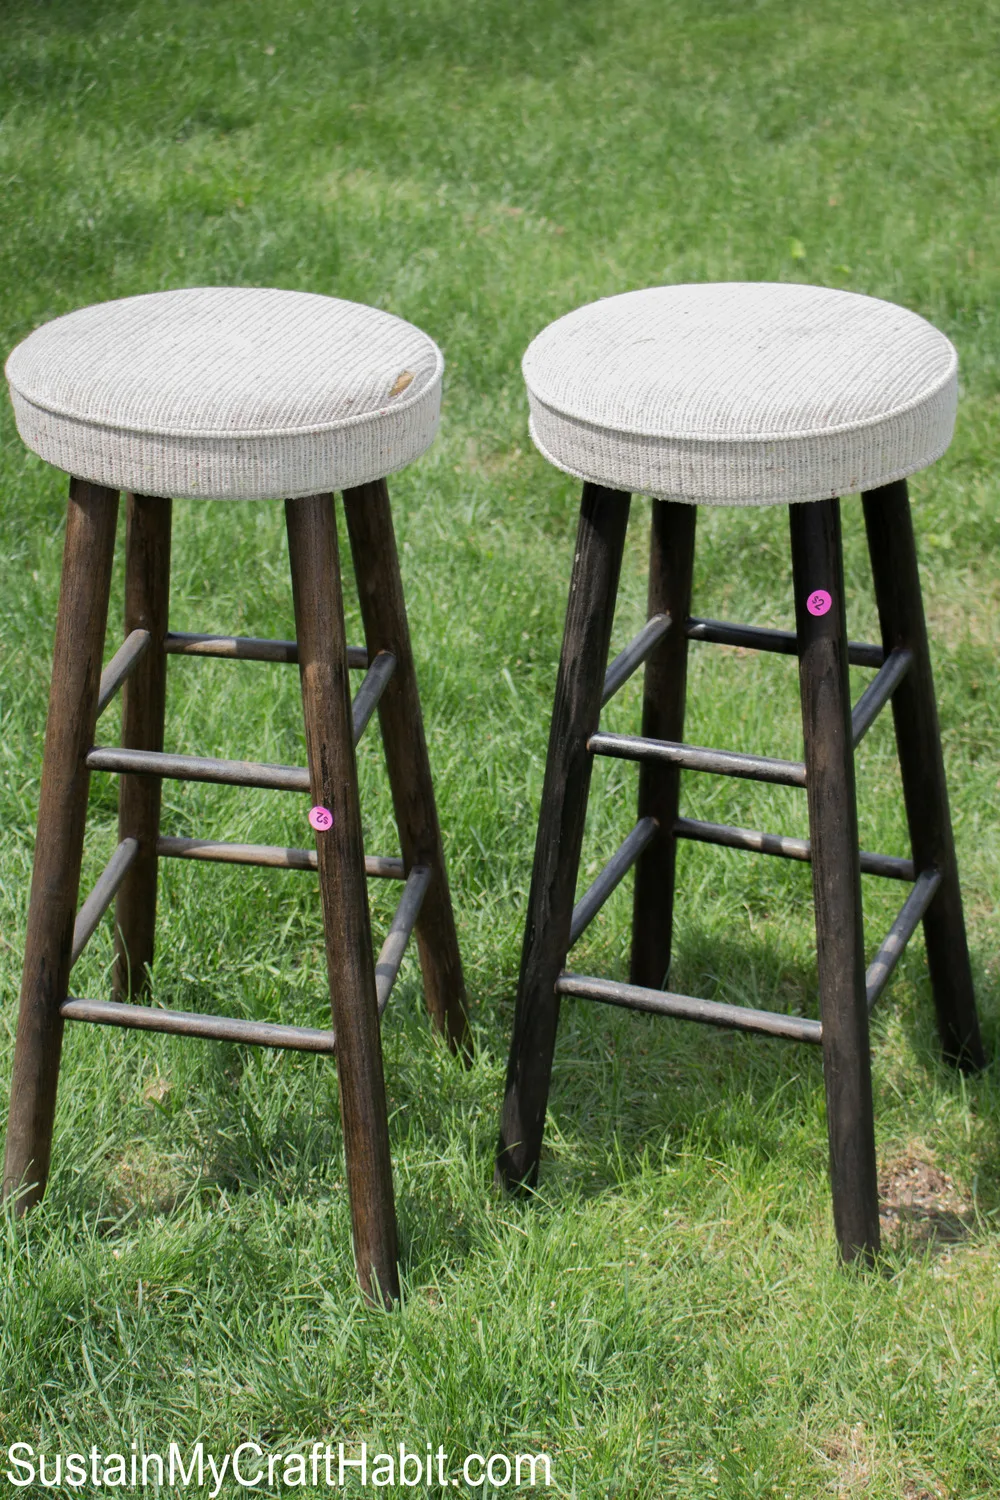 Two bar stools with dark brown legs and light fabric upholstery on the grass.